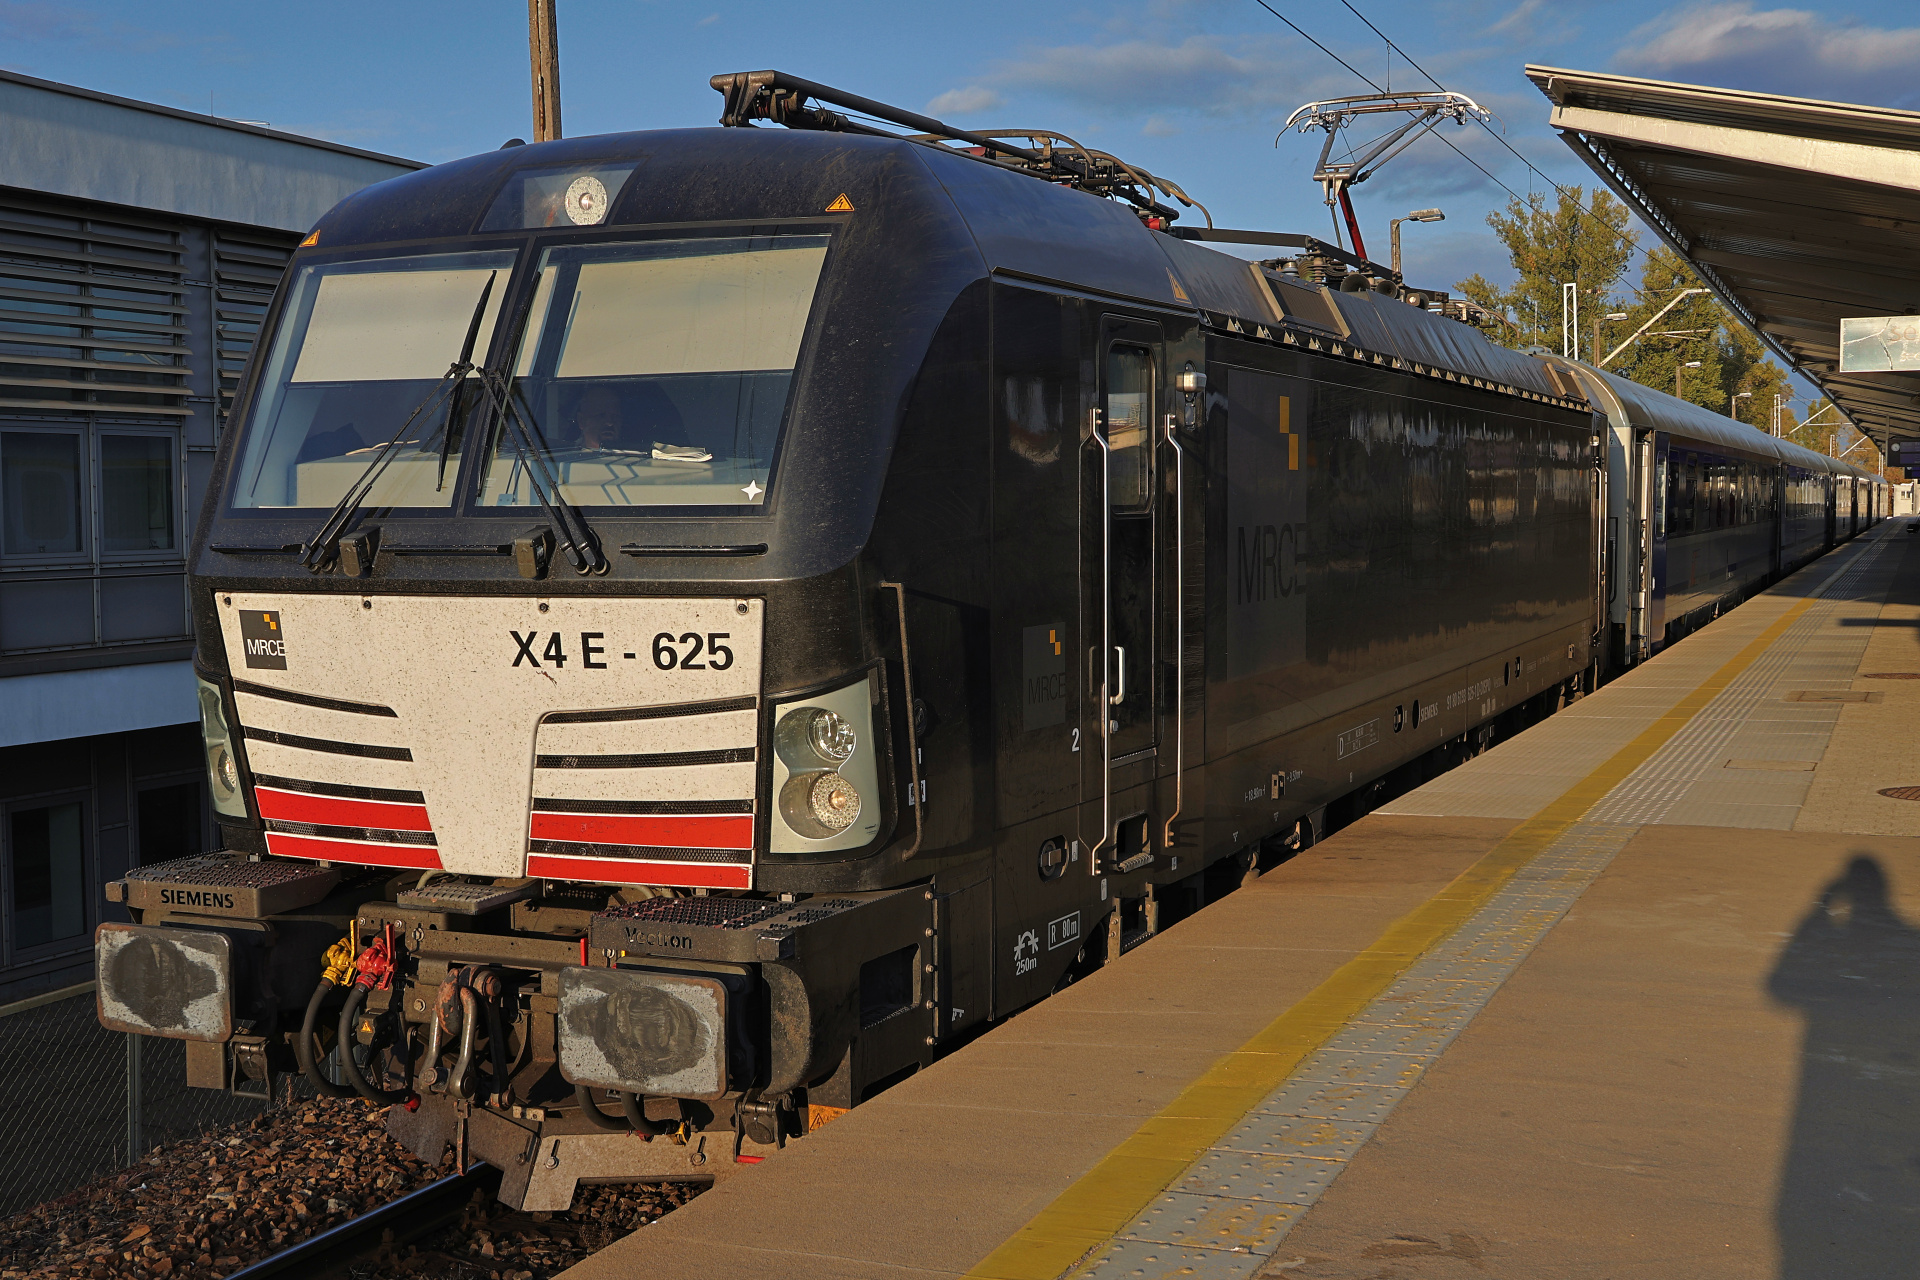 X4-E-Loco-AB Vectron MS X4 E 625 (Vehicles » Trains and Locomotives » Siemens Vectron)